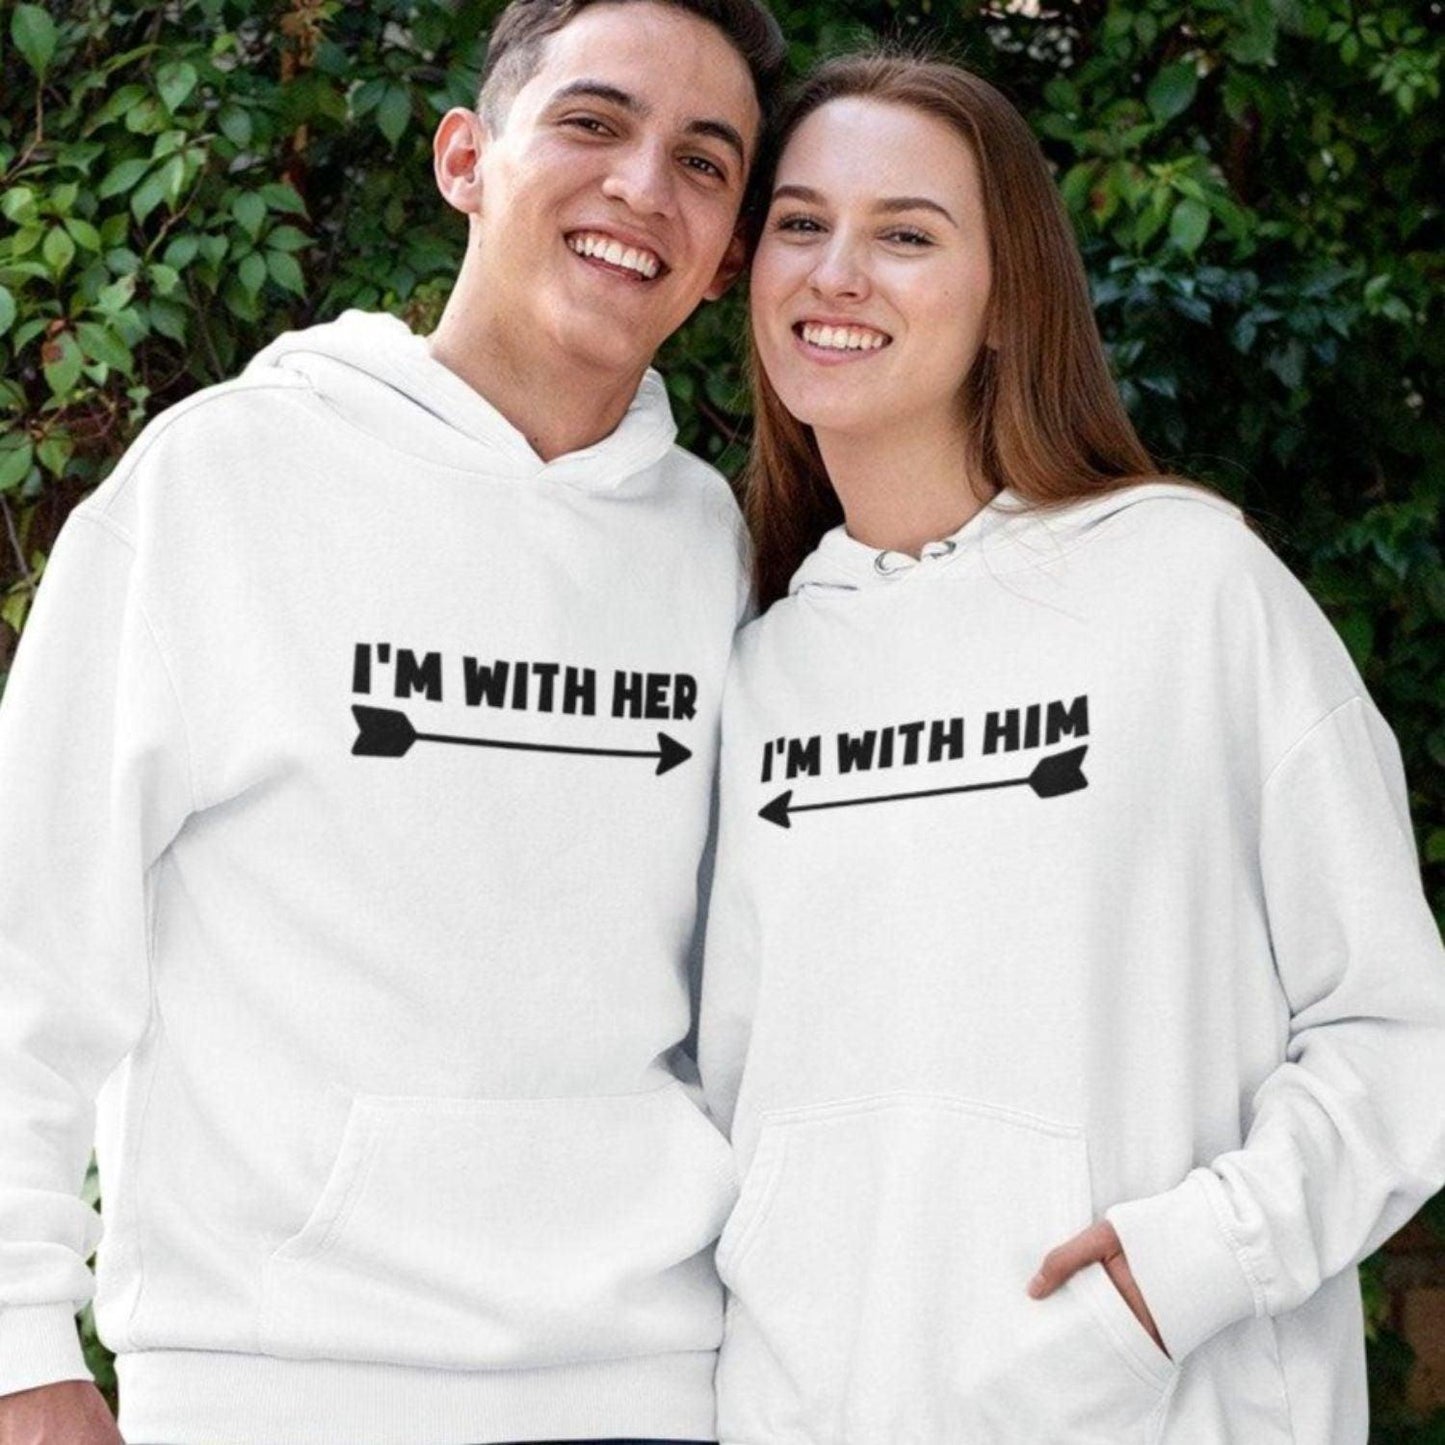 Gift for Lovebirds: Coordinated Outfits - 'I'm With Her' & 'I'm With Him' Combo Set - 4Lovebirds